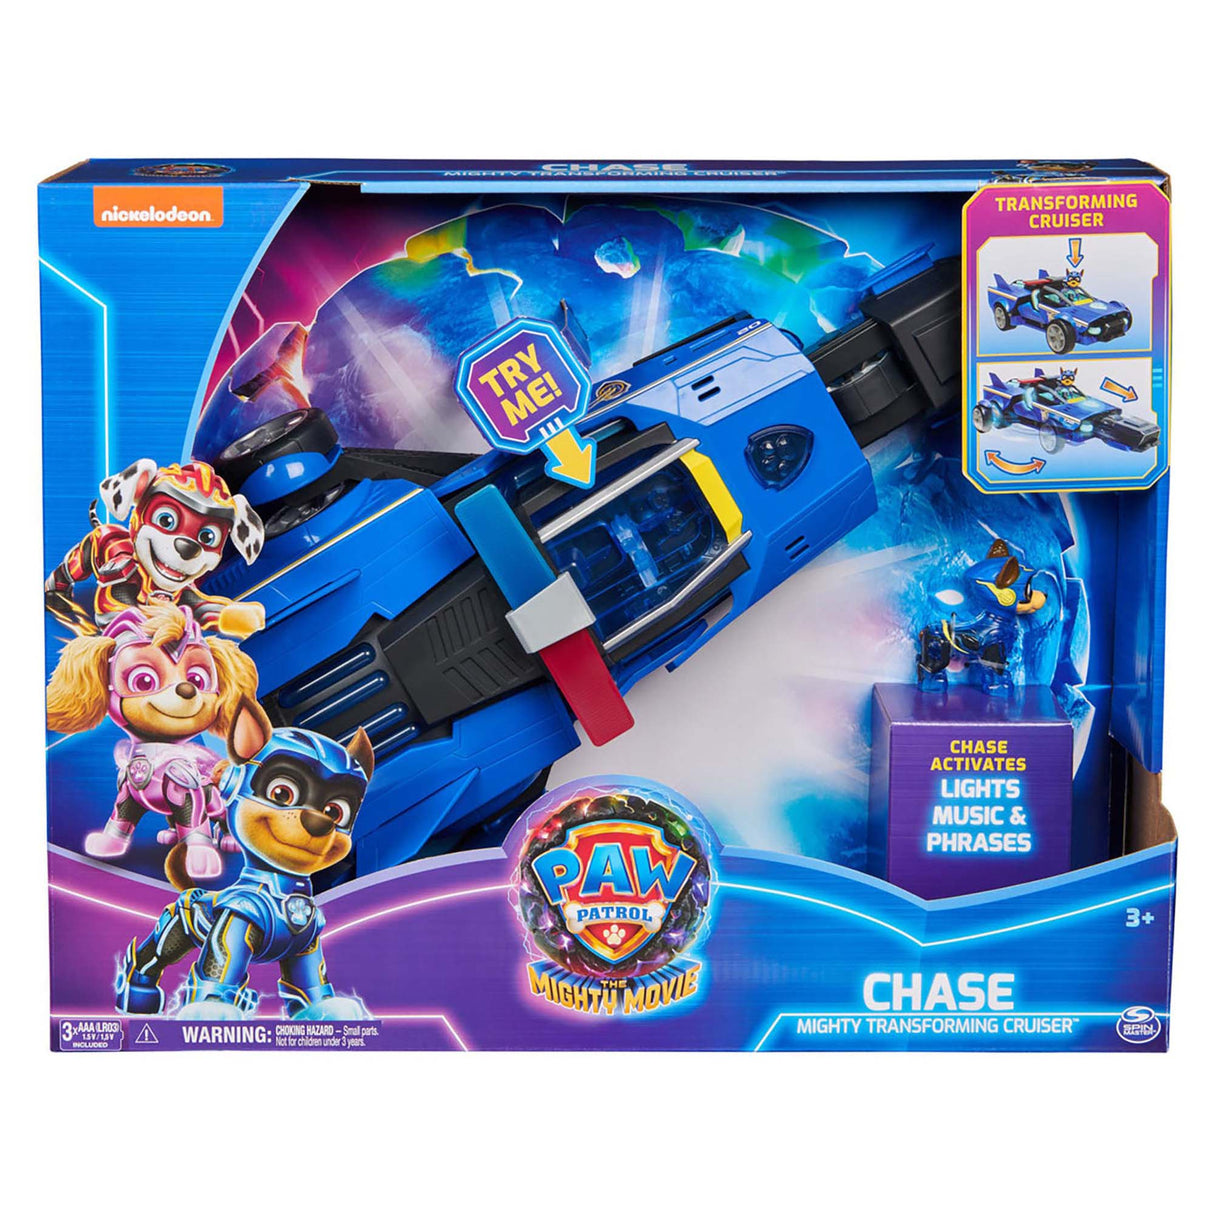 Paw Patrol The Mighty Movie Chase Mighty Transforming Cruiser